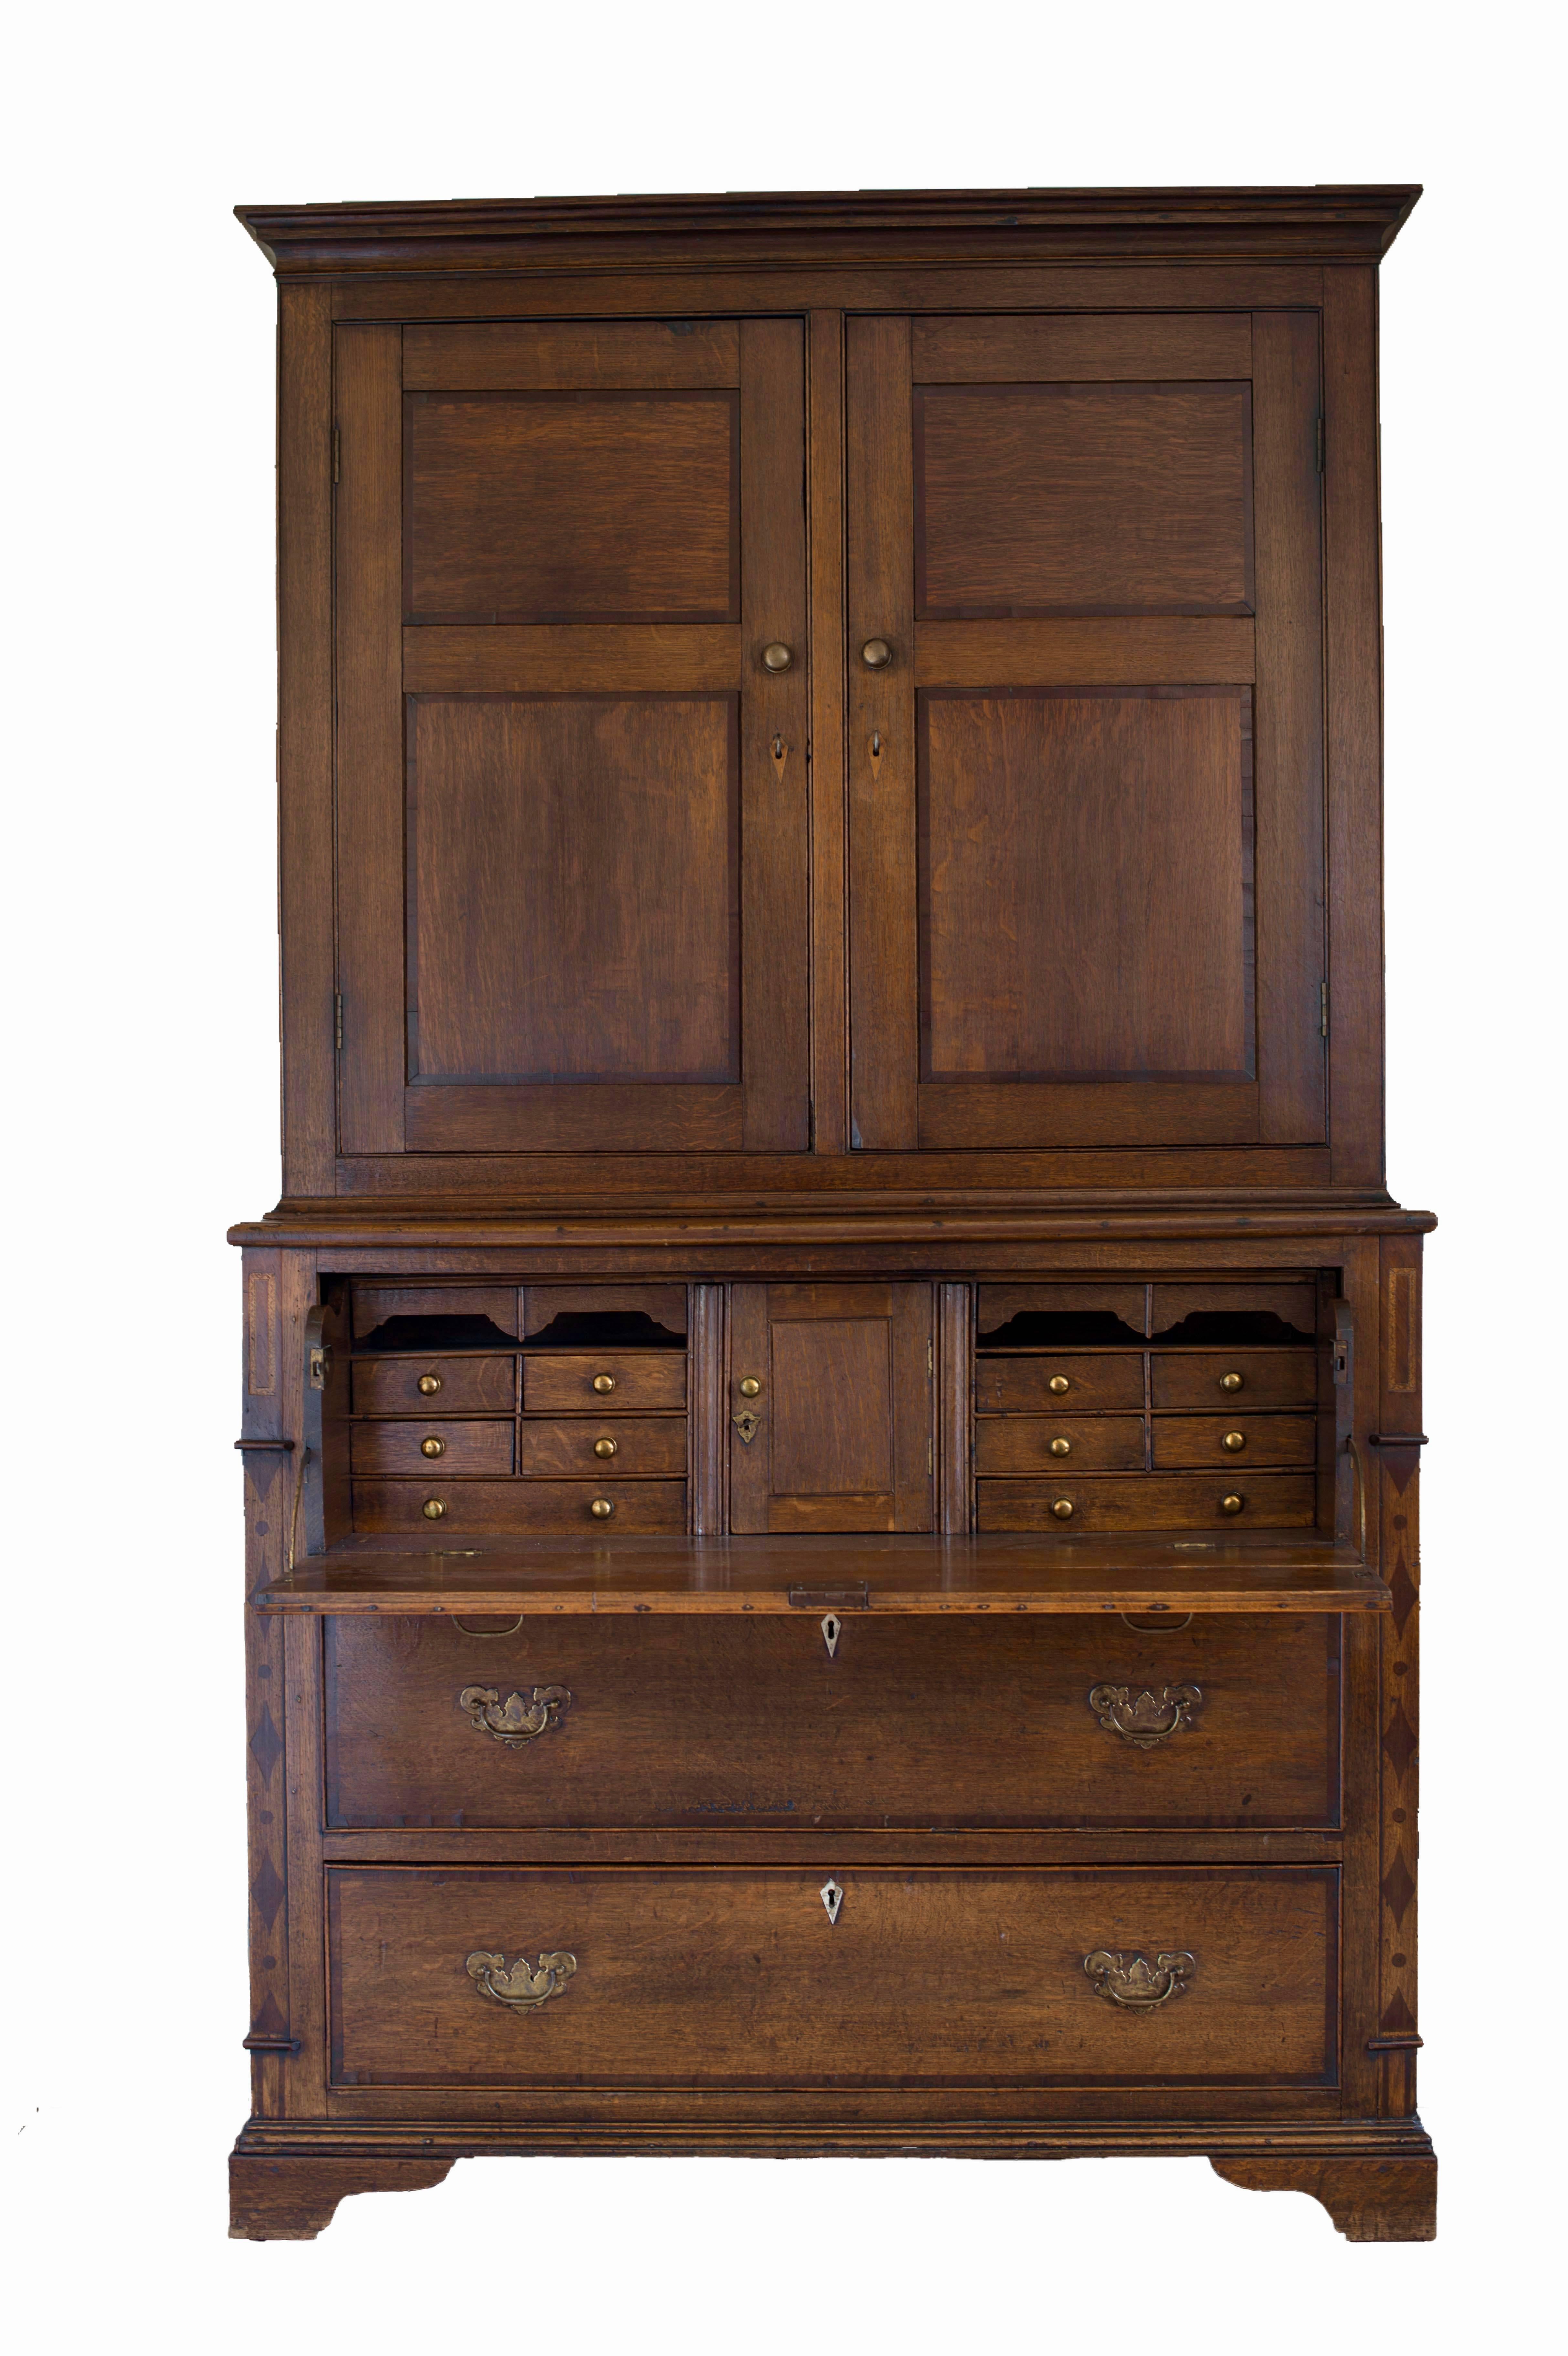 A English most practical and charming country bureau bookcase, patinated oak en mahogany banding, epoque George III, circa 1800.
The bureau bookcase does have blind doors with two panelled doors and bookshelves, the bureau with enclosed fitted